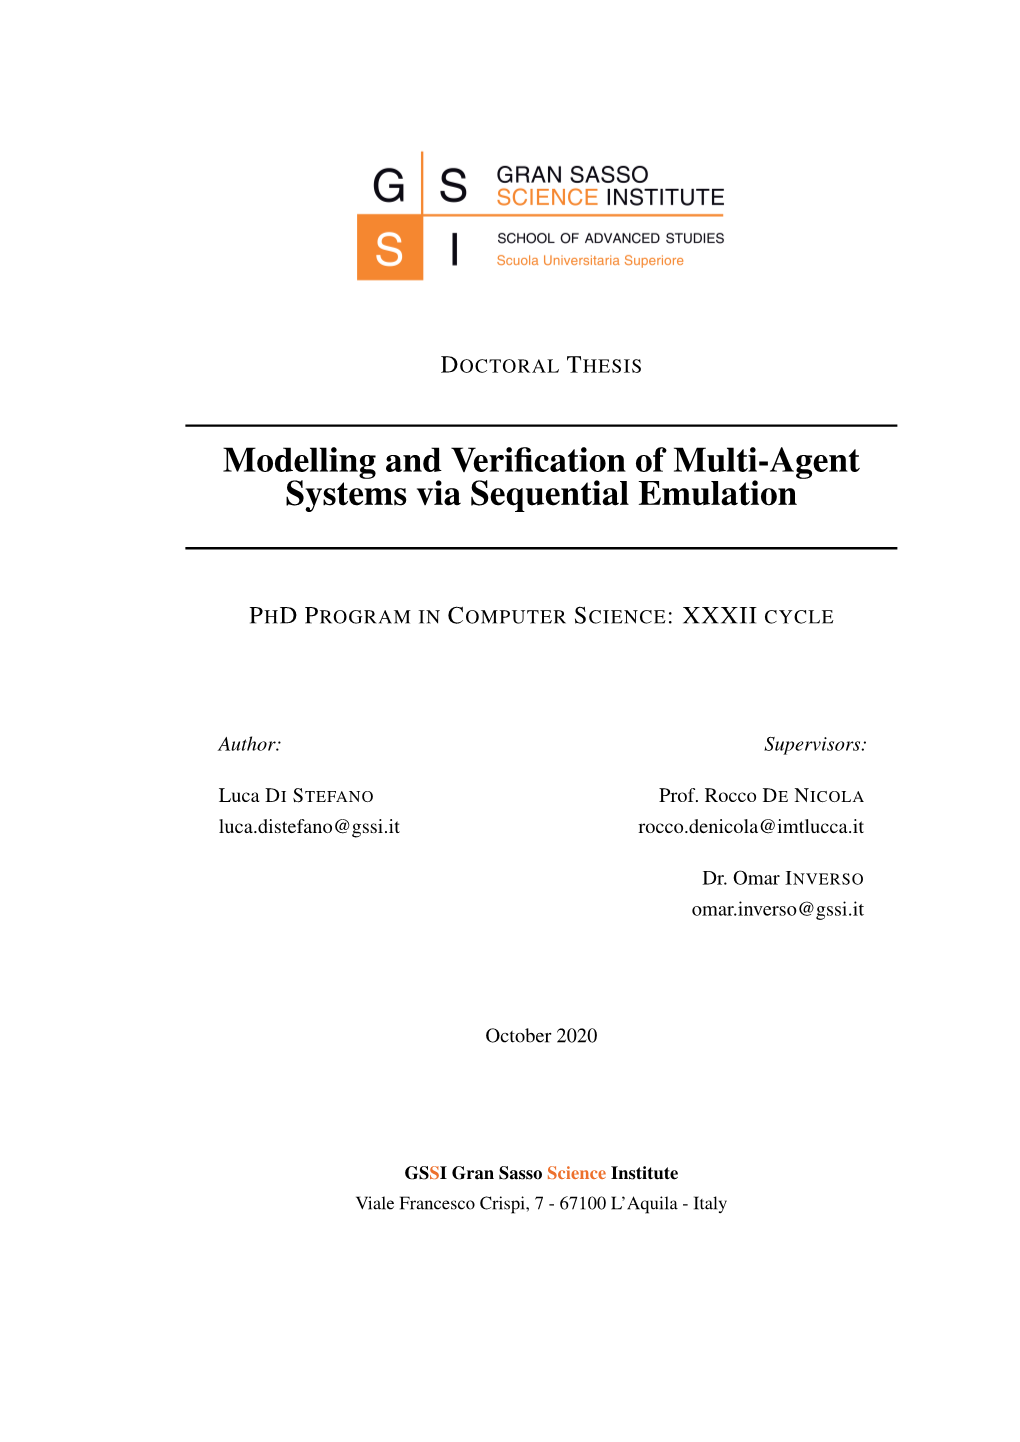 Modelling and Verification of Multi-Agent Systems Via Sequential Emulation